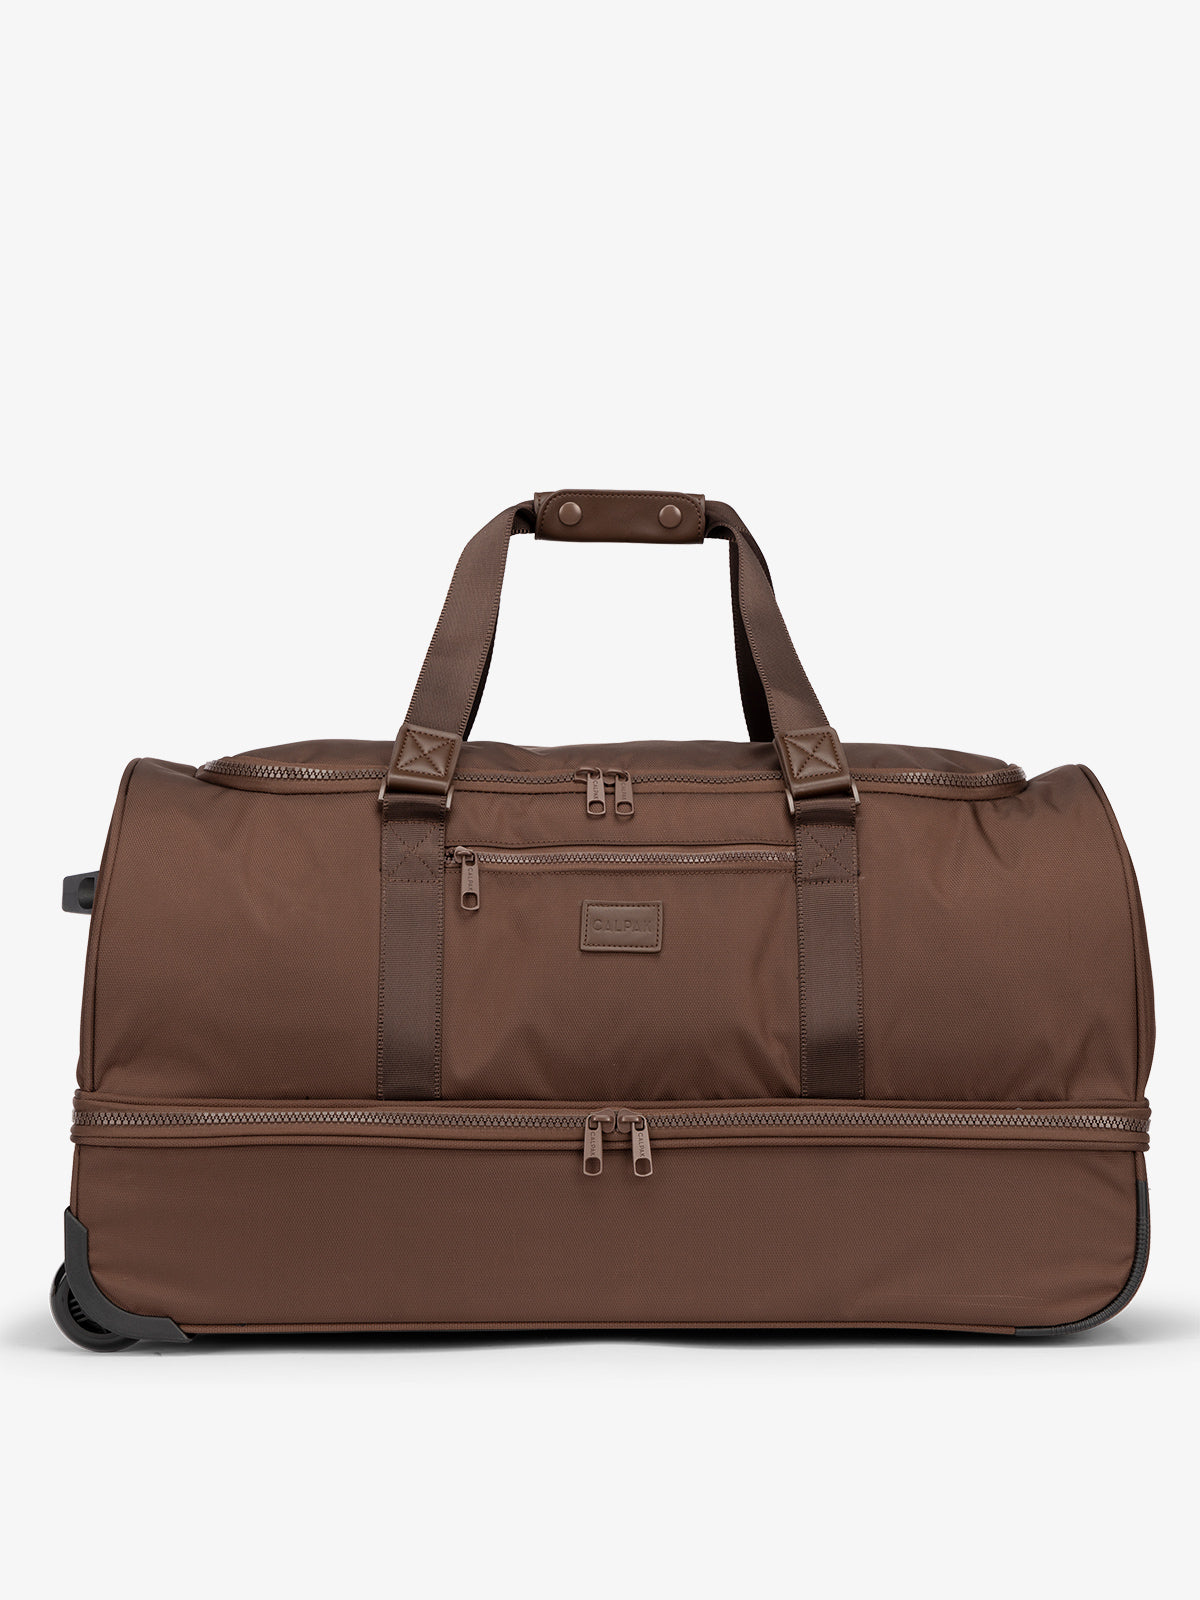 CALPAK Stevyn Large Rolling Duffel with wheels, dual handles, zipper enclosed compartments, and shoe compartment in walnut